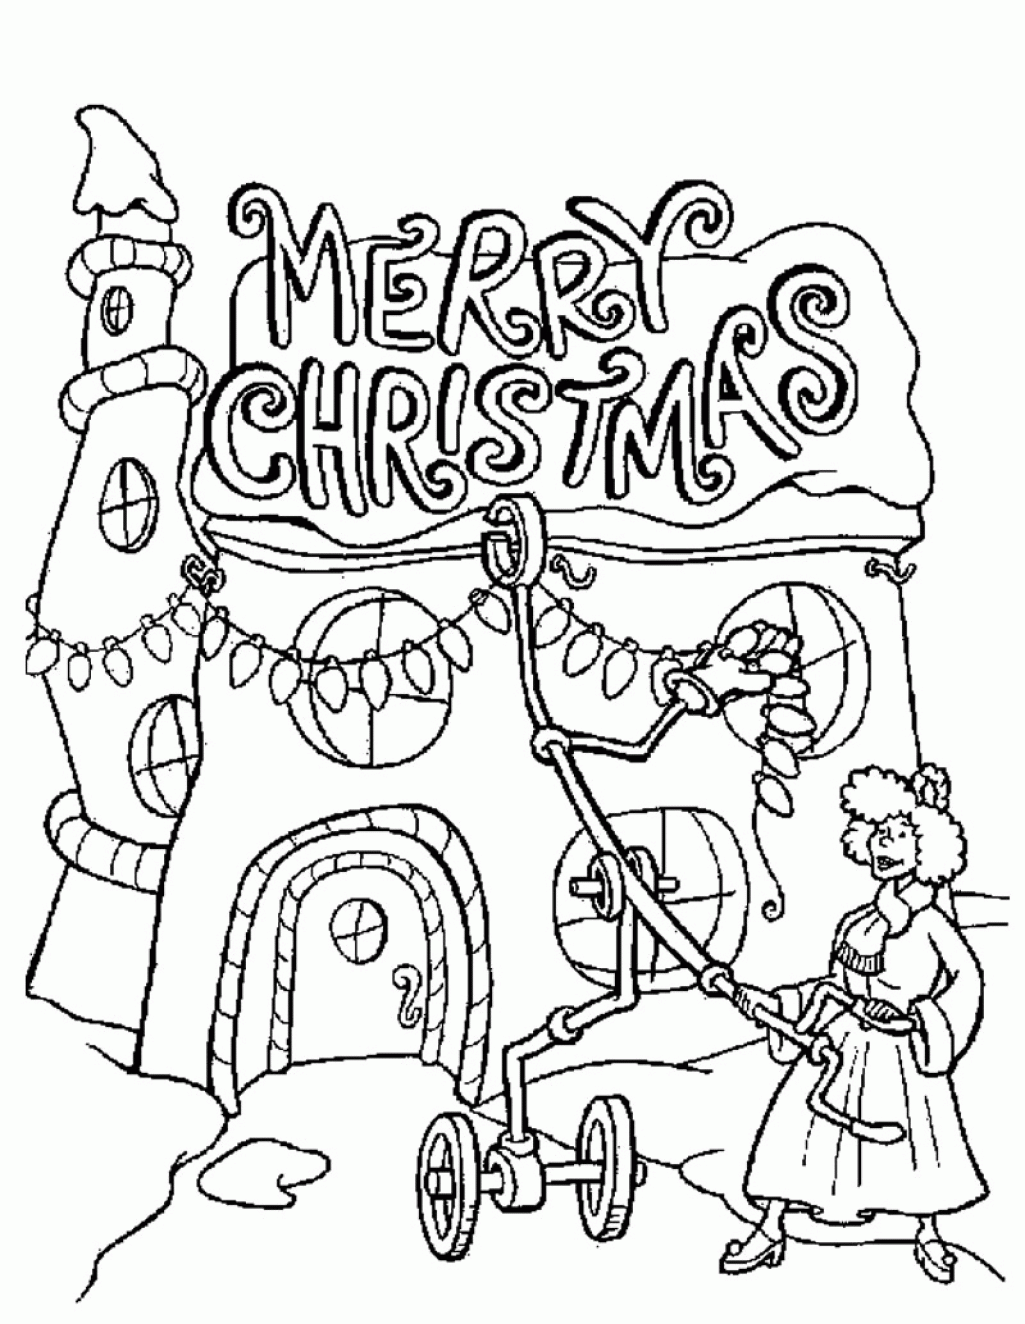 Christmas Color Pages Online - Coloring Page